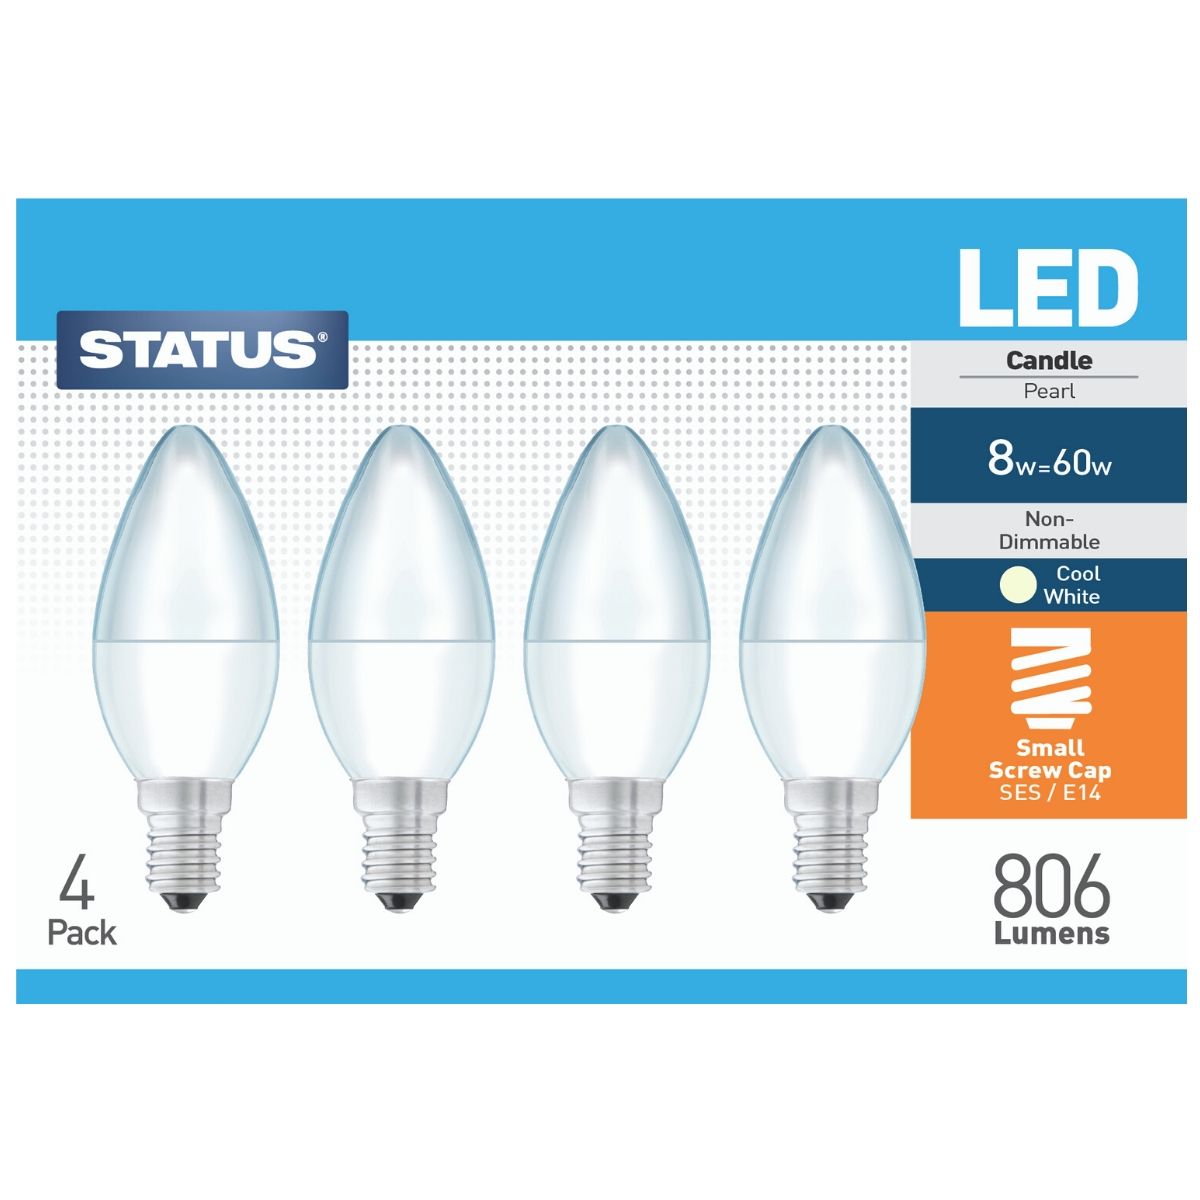 View 4 x 8w E14 LED Candle Bulbs information